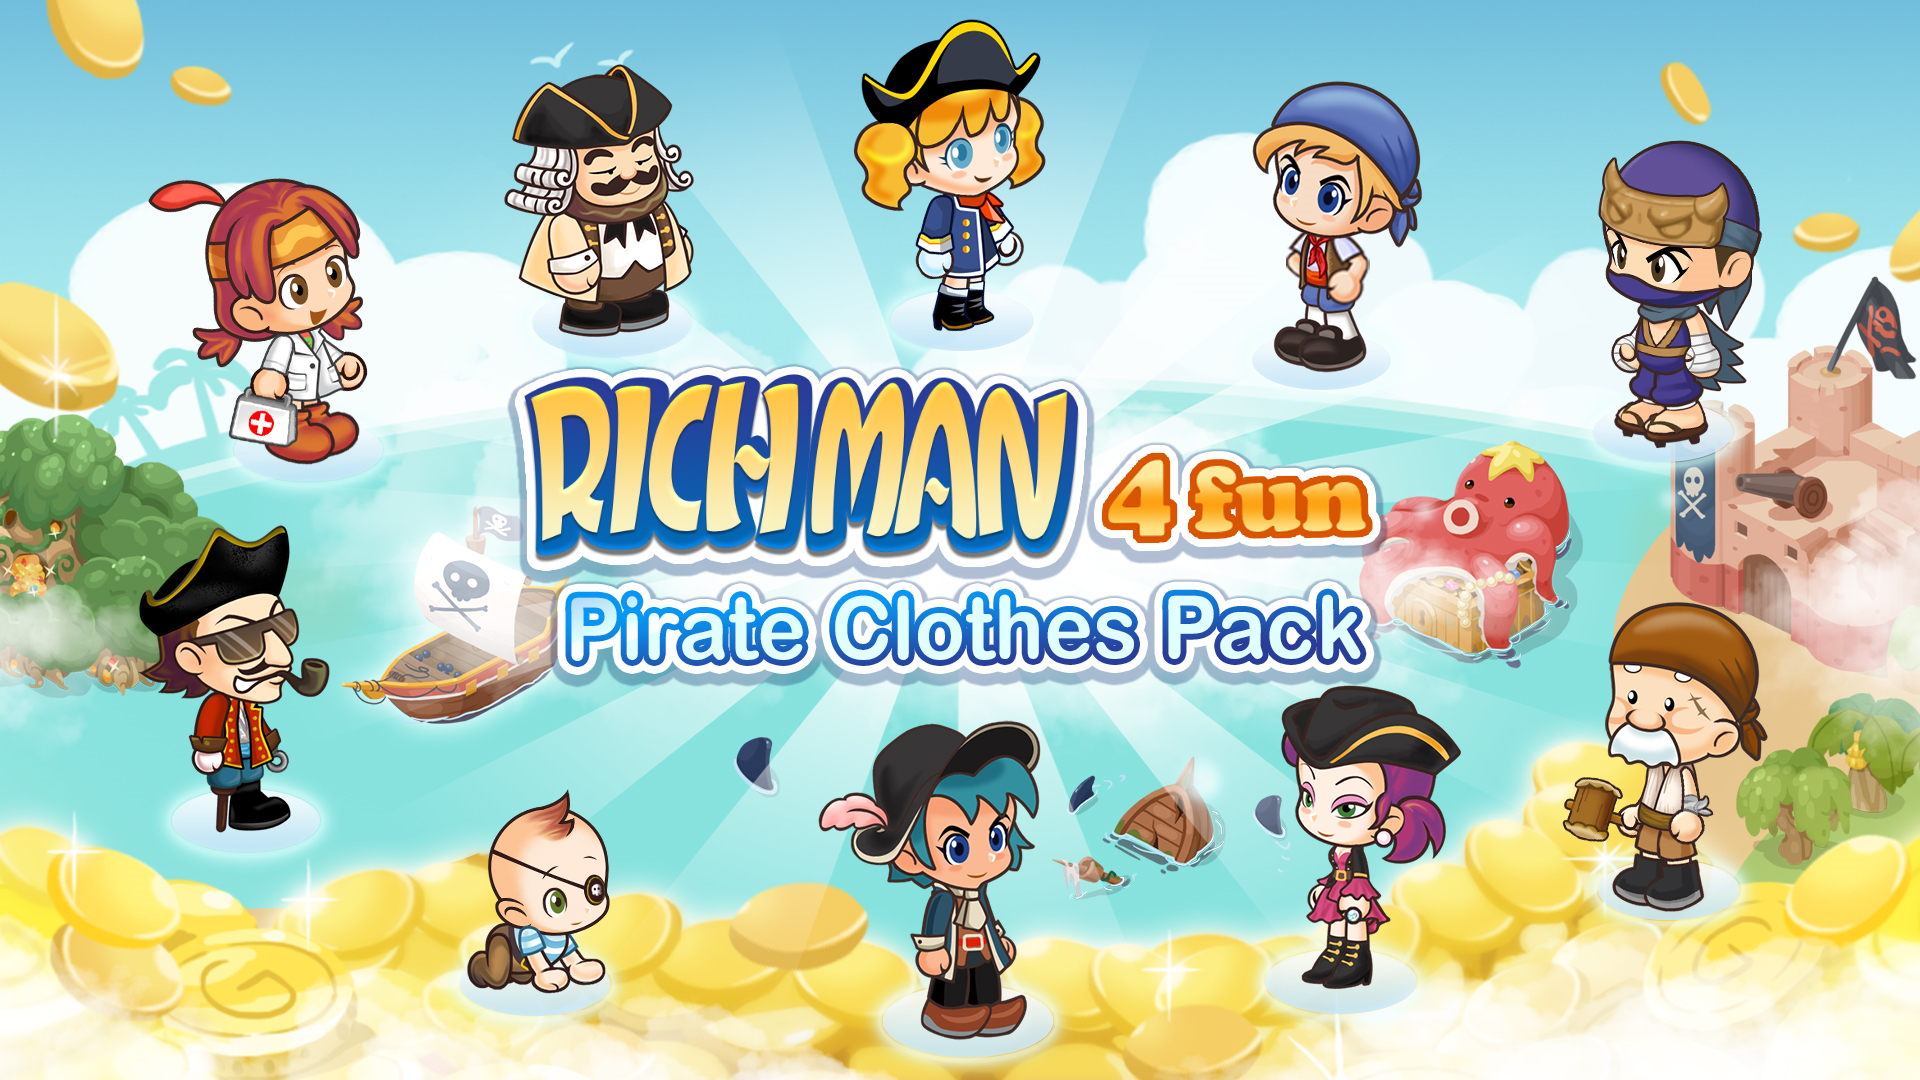 Pirate Clothes Pack